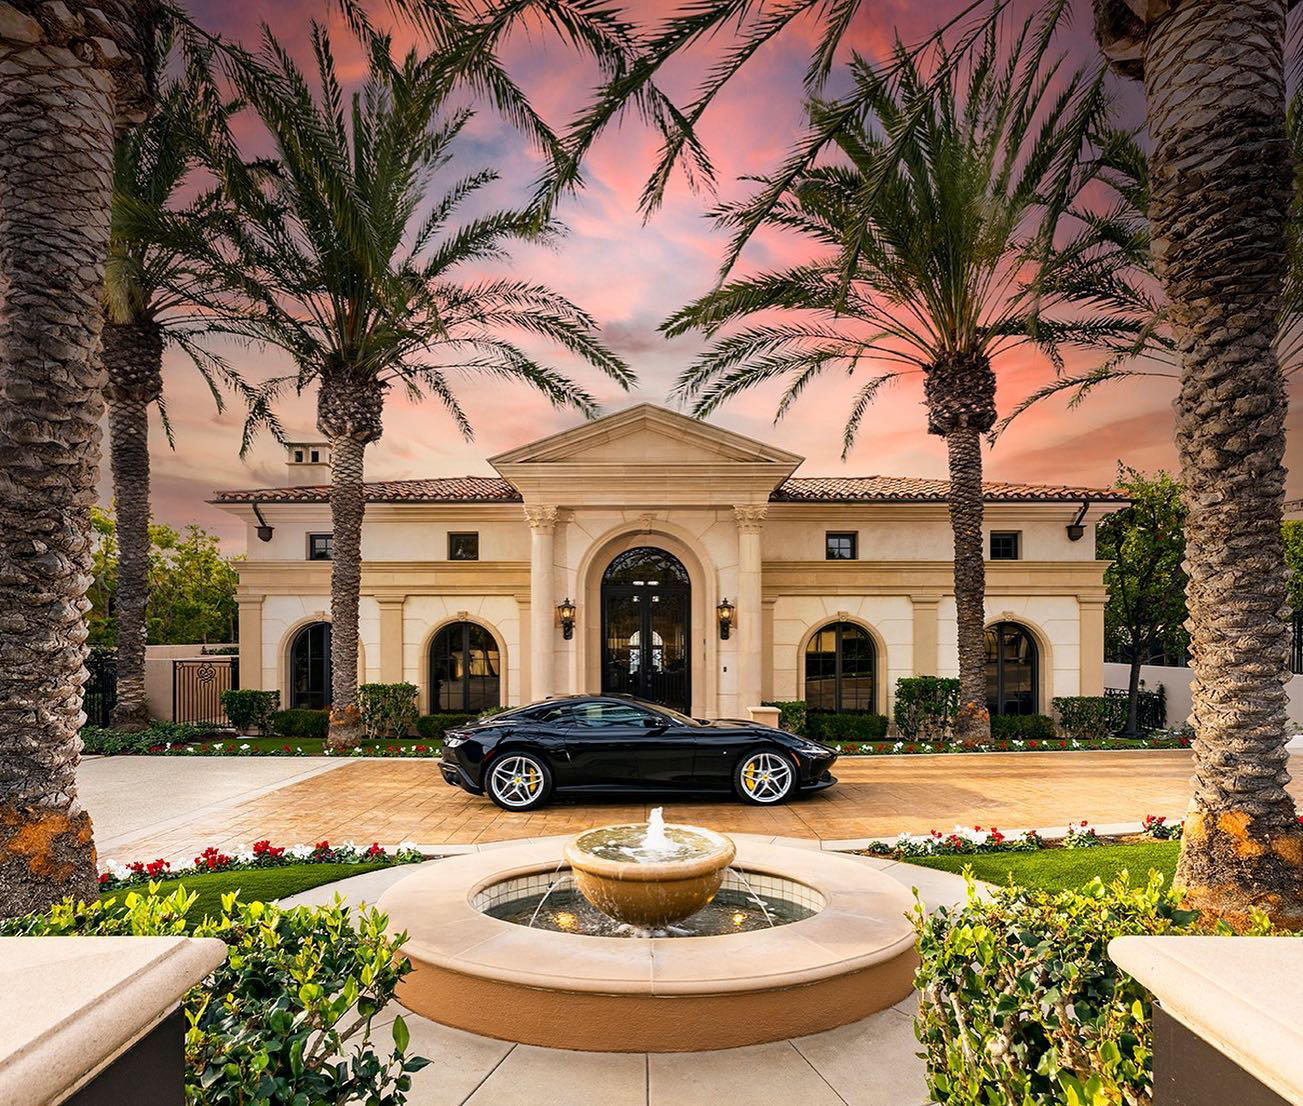 Luxury Real Estate - Nestled within Newport Coast’s private Pelican Crest community